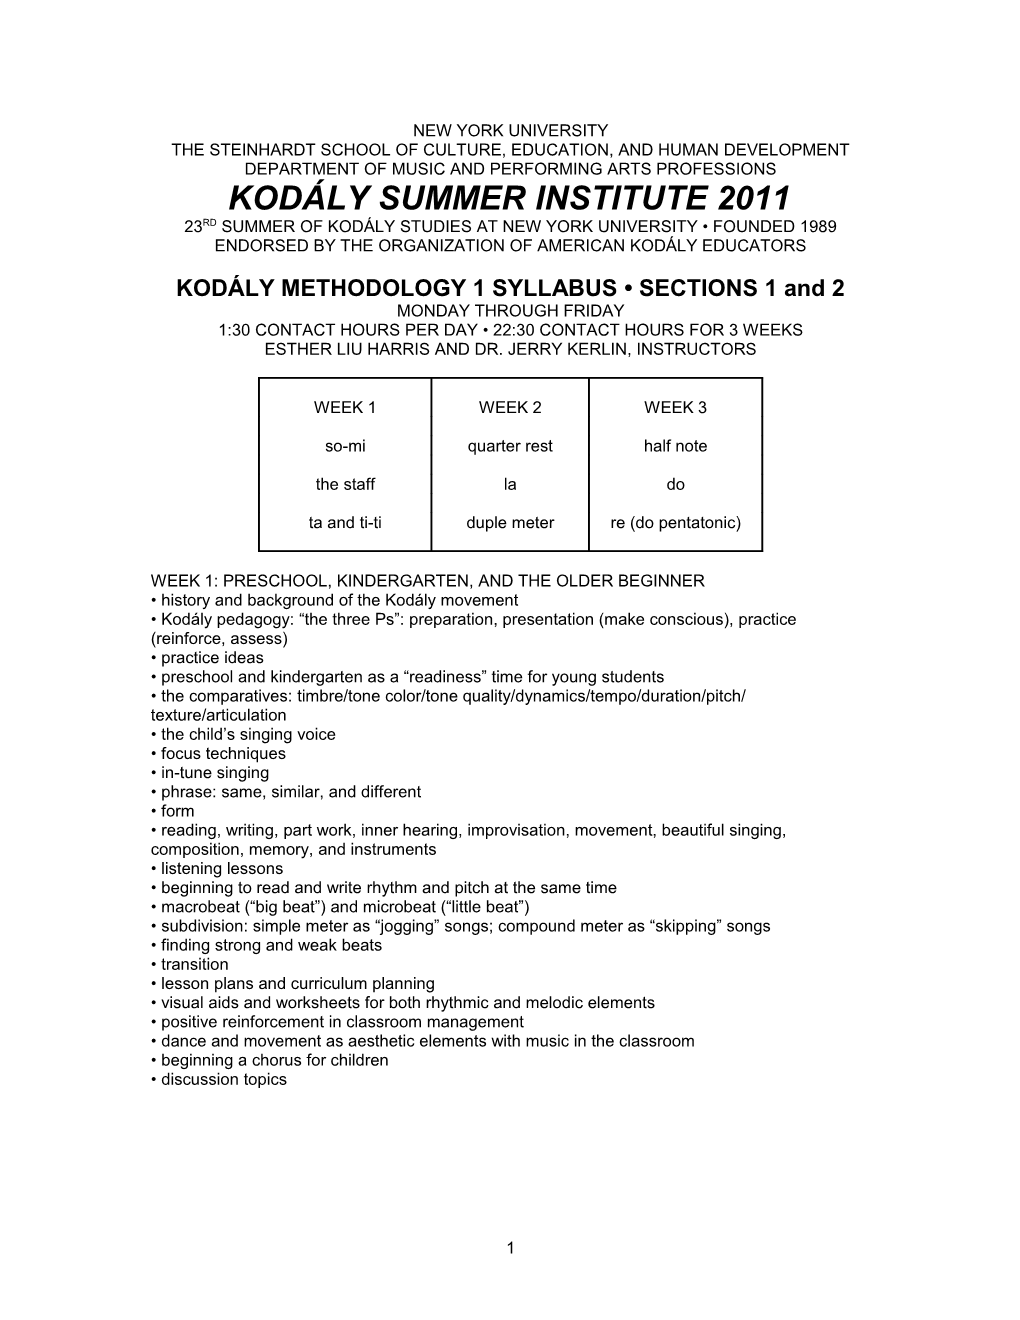 Kodaly Methodology 1 (Sections 1 and 2)